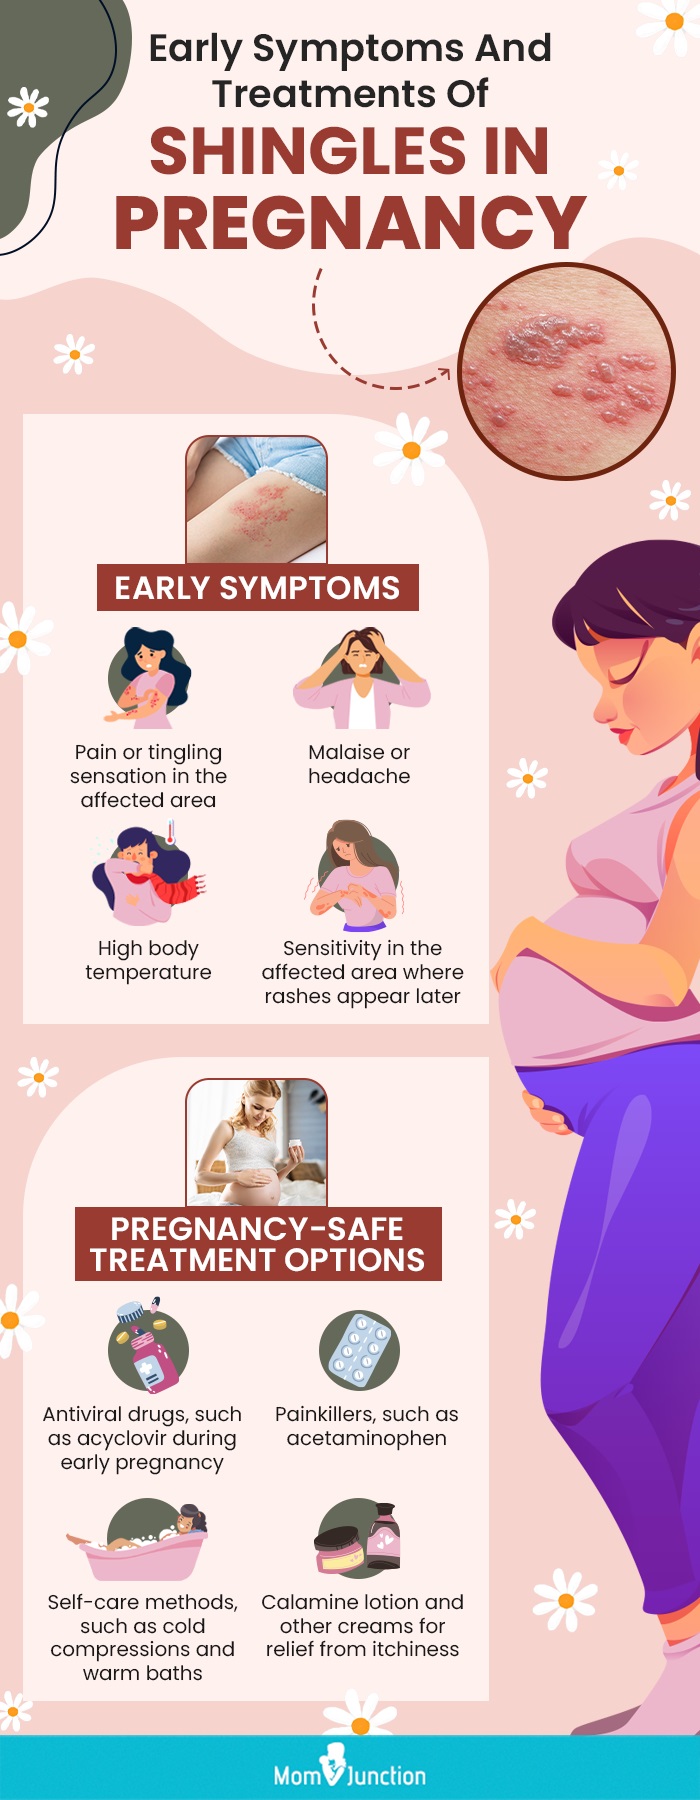 early symptoms and treatments of shingles in pregnancy (infographic)